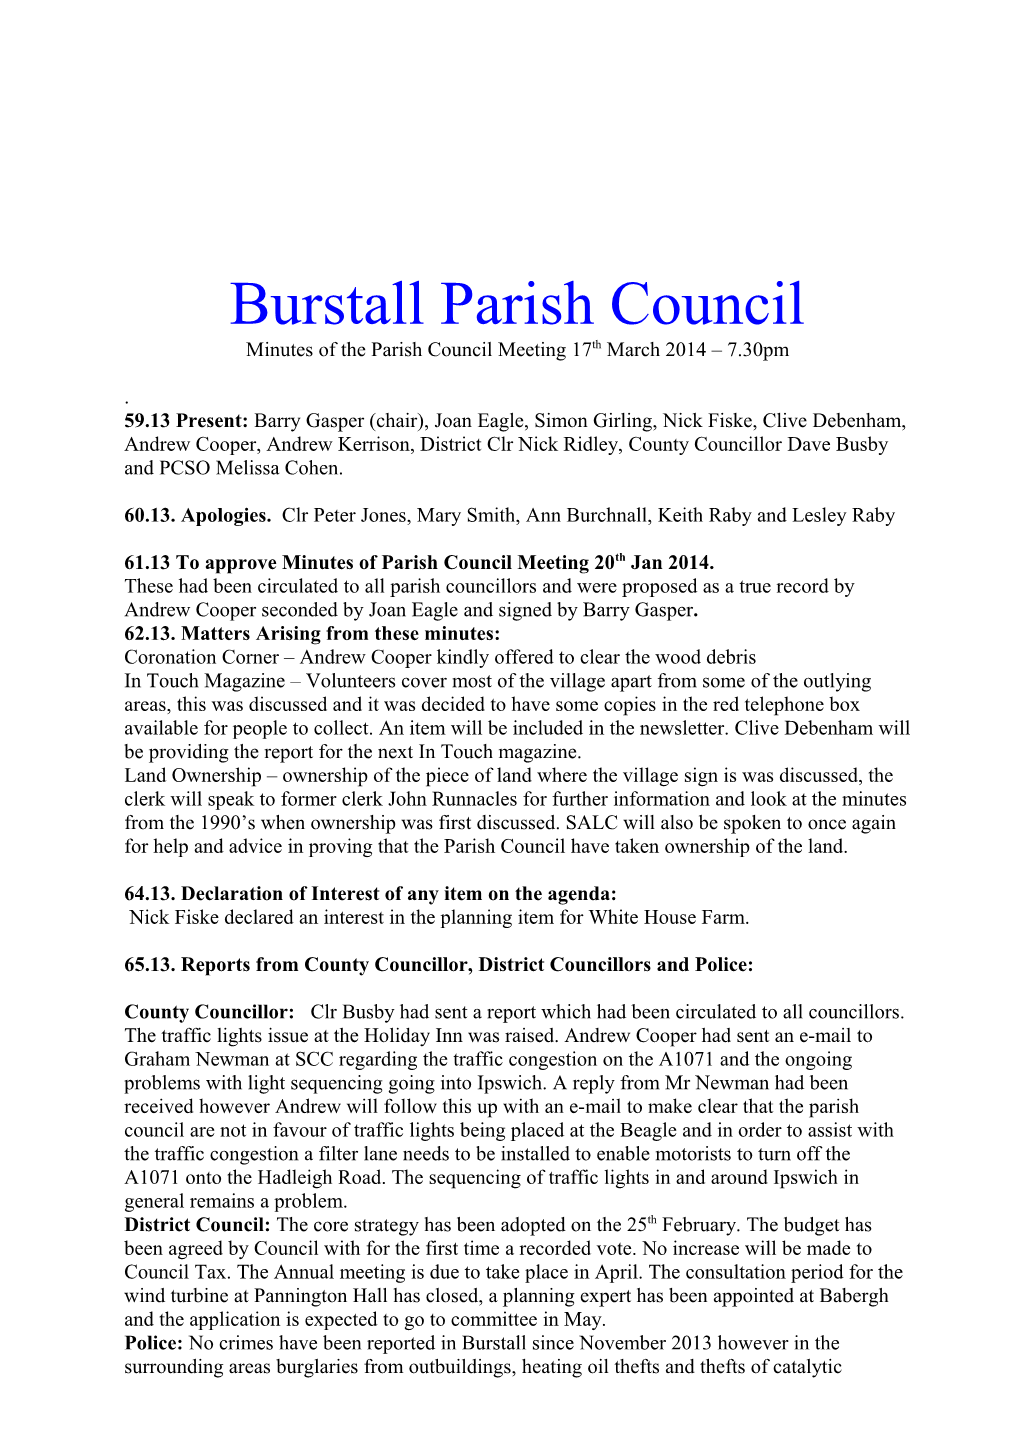 Minutes of the Parish Council Meeting 17Thmarch 2014 7.30Pm